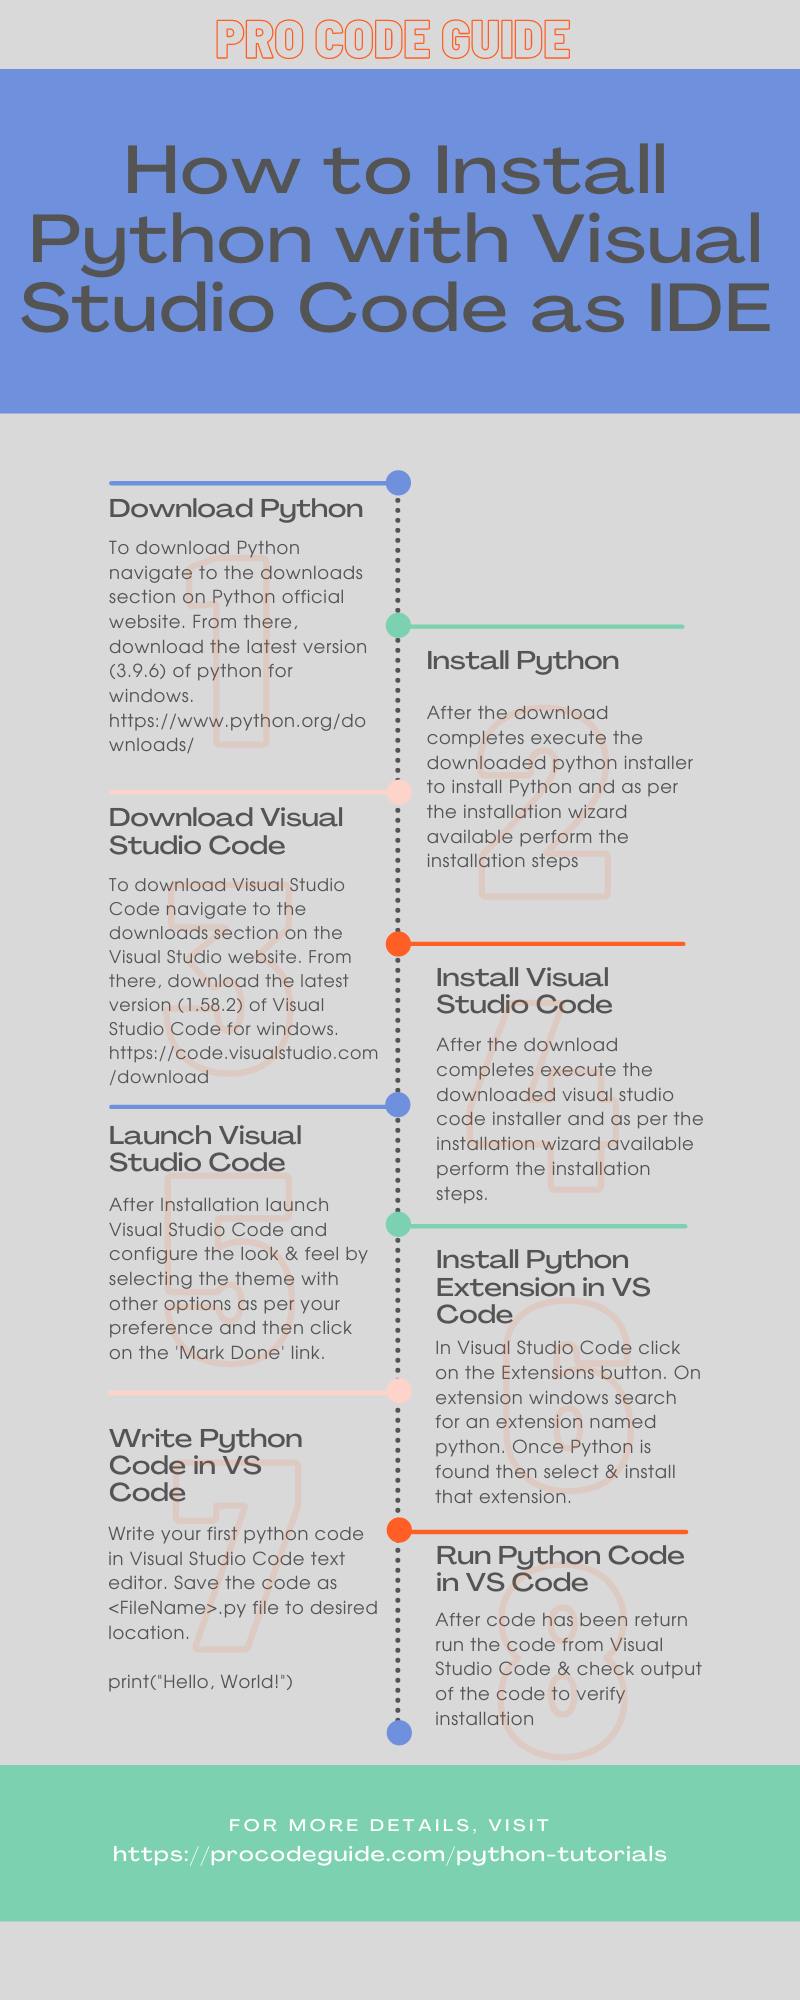 How to Install Python with Visual Studio Code as IDE - Infographic